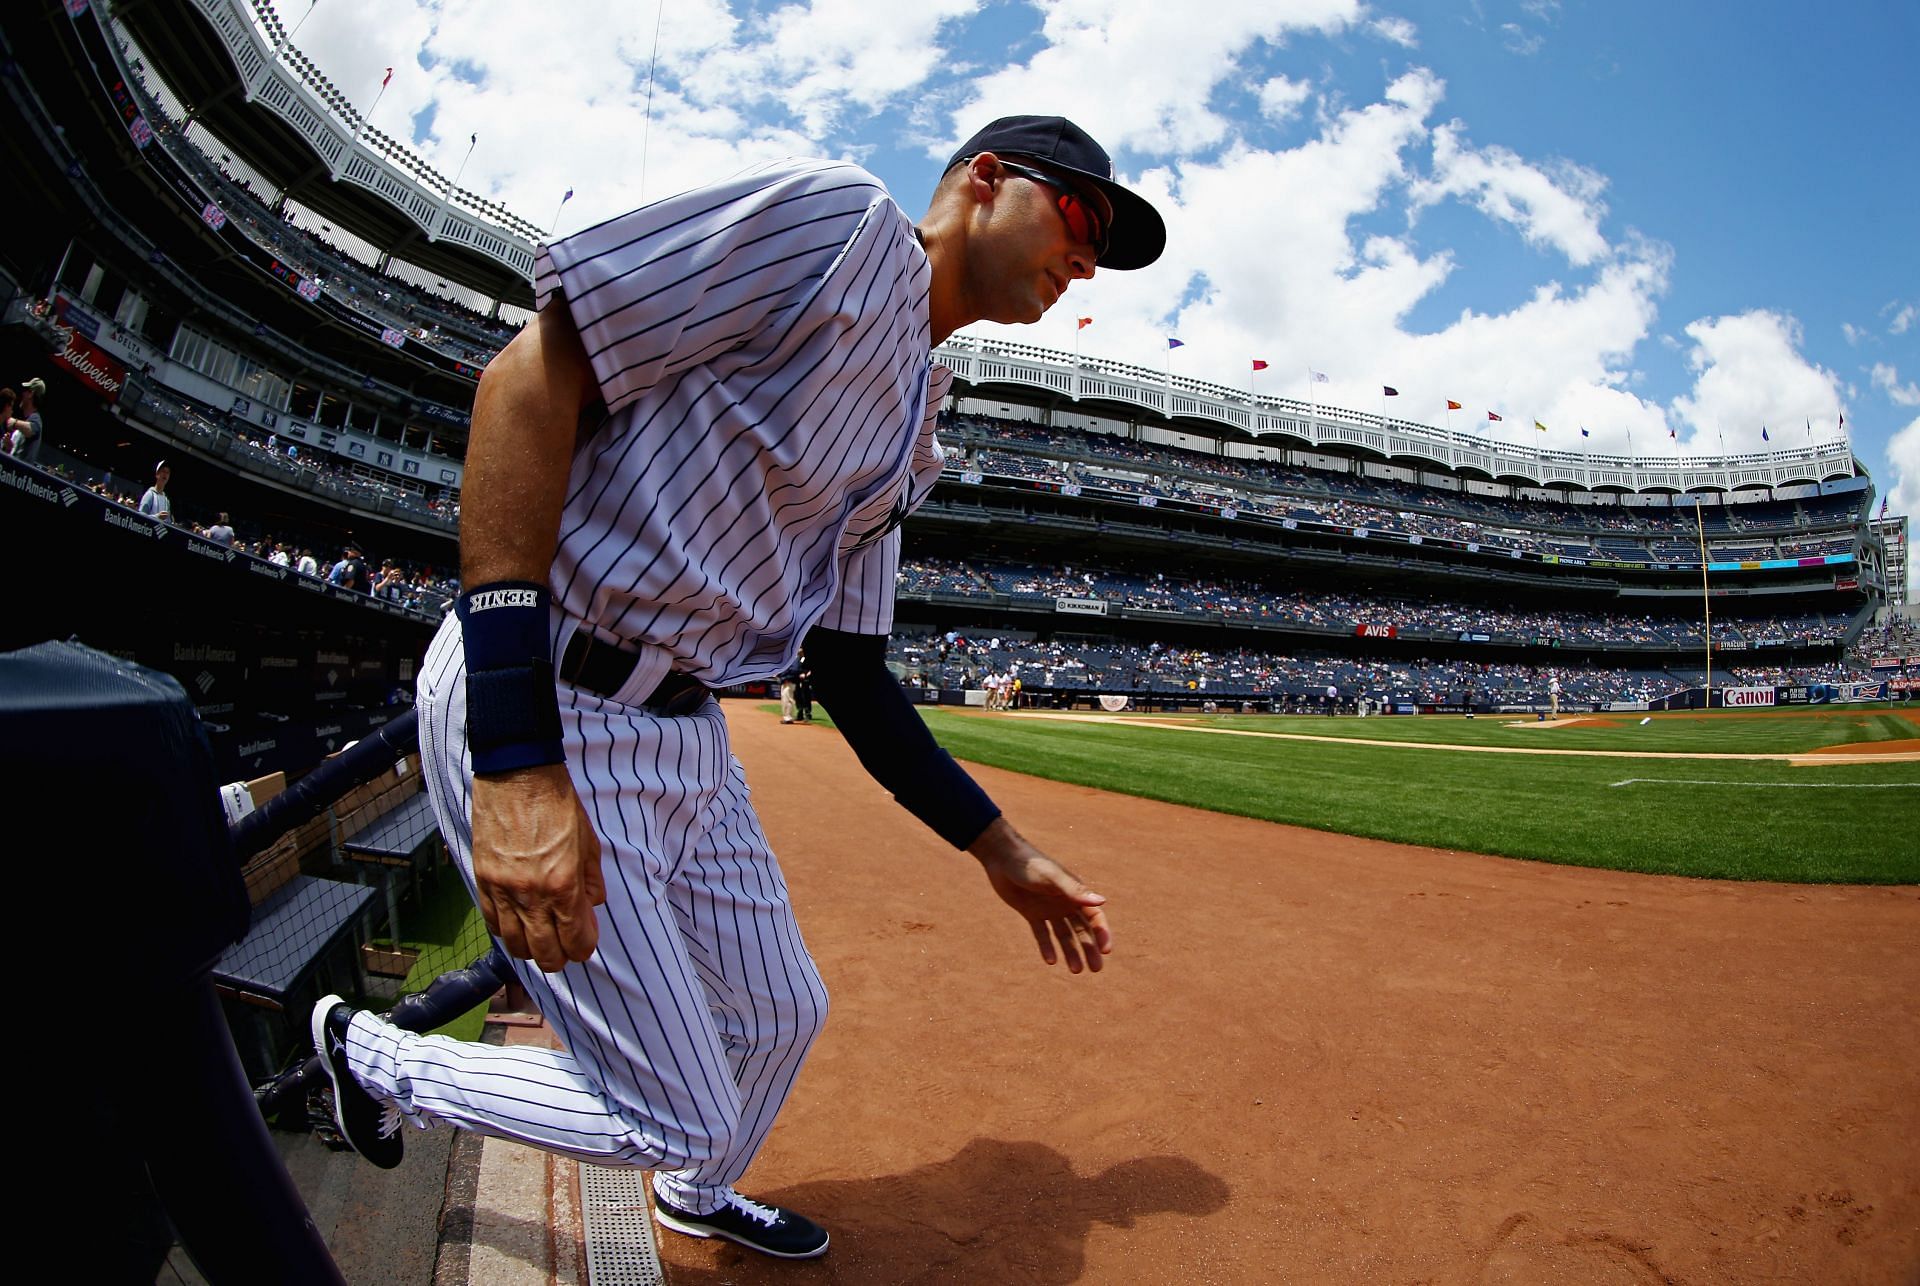 Pittsburgh Pirates v New York Yankees - Jeter of the New York Yankees runs onto the field at Yankee Stadium on May 18, 2014, in the Bronx borough of New York City. (Photo by Al Bello/Getty Images)